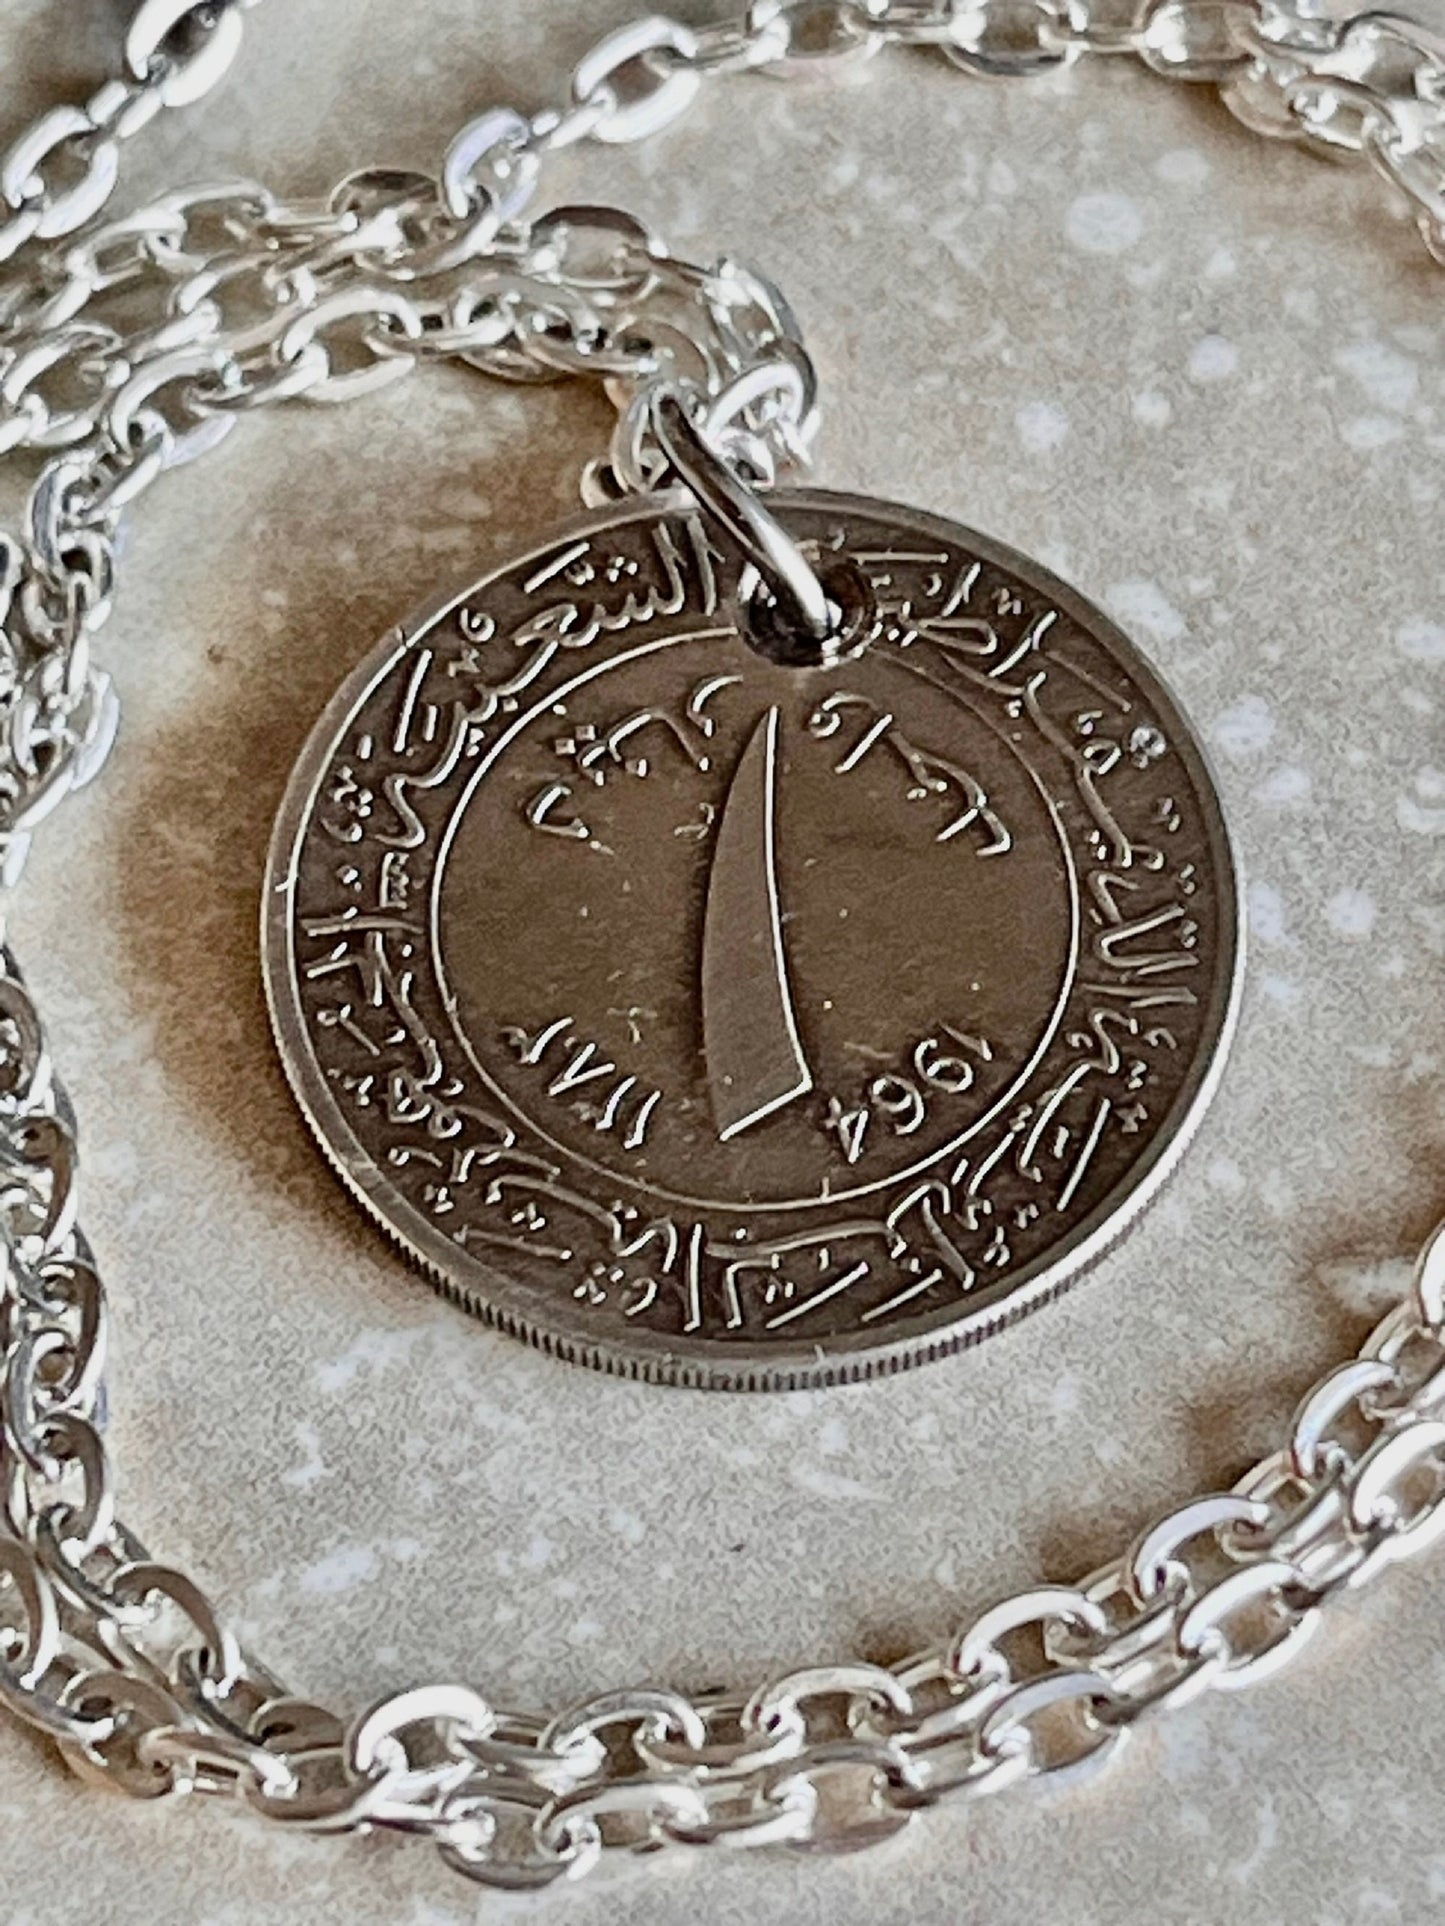 Algeria 5 Centimes Coin Pendant Algerian Personal Necklace Old Vintage Handmade Jewelry Gift Friend Charm For Him Her World Coin Collector